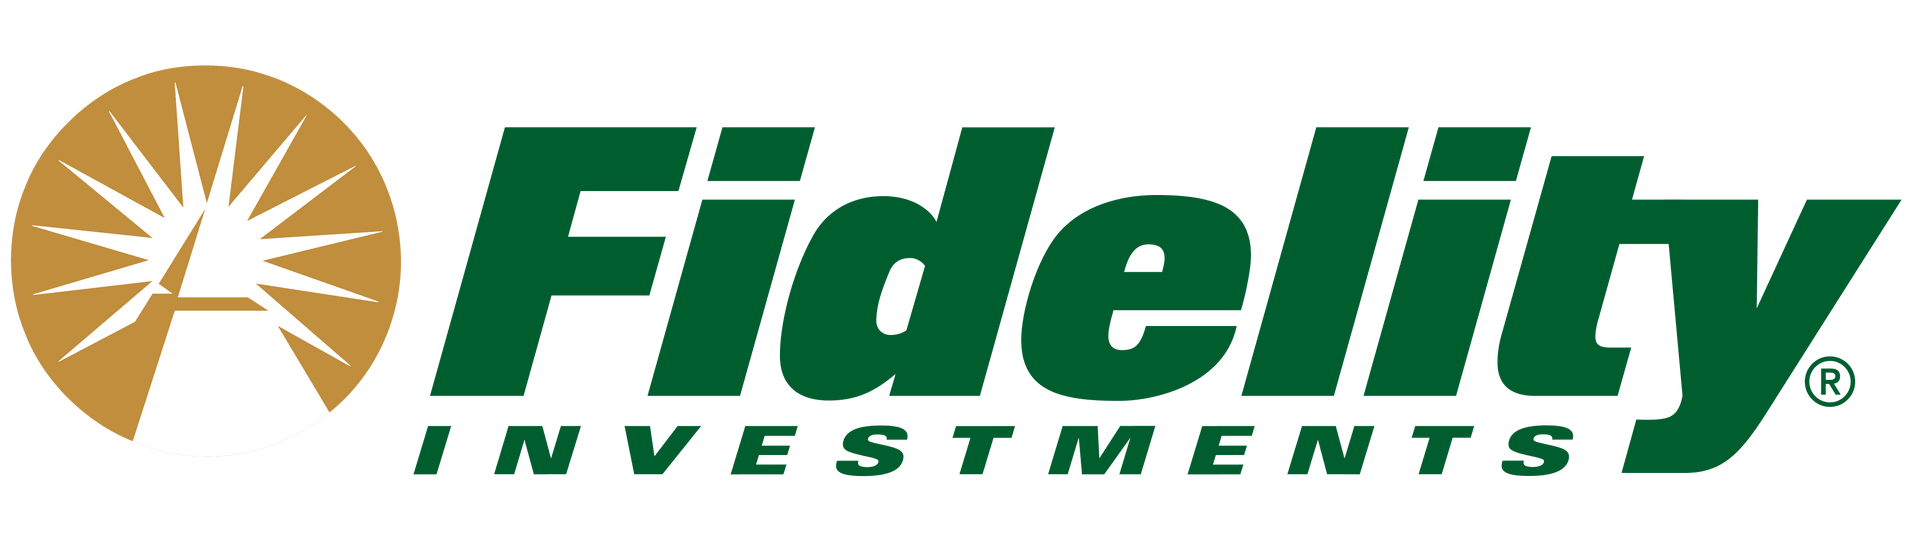 A green and gold logo for fidelity investments